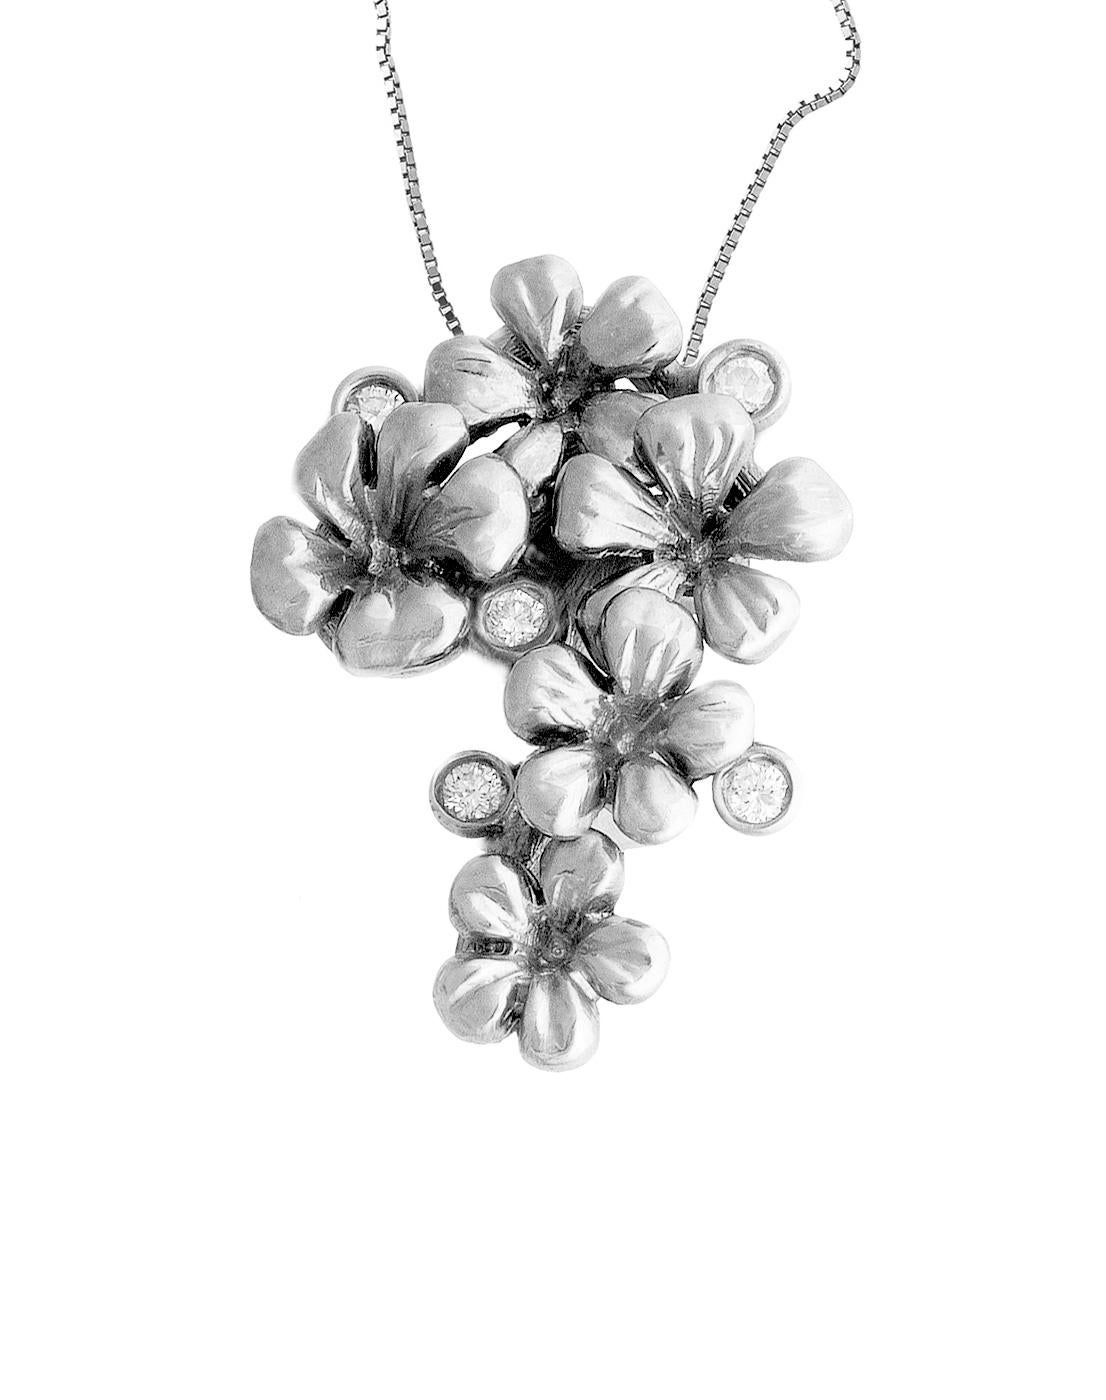 The 18 karat white gold Plum Blossom Pendant Necklace features 5 round natural diamonds and a detachable natural quartz (13 mm). This jewelry collection has been featured in Vogue UA and Harper's Bazaar reviews. The diamonds are top quality natural